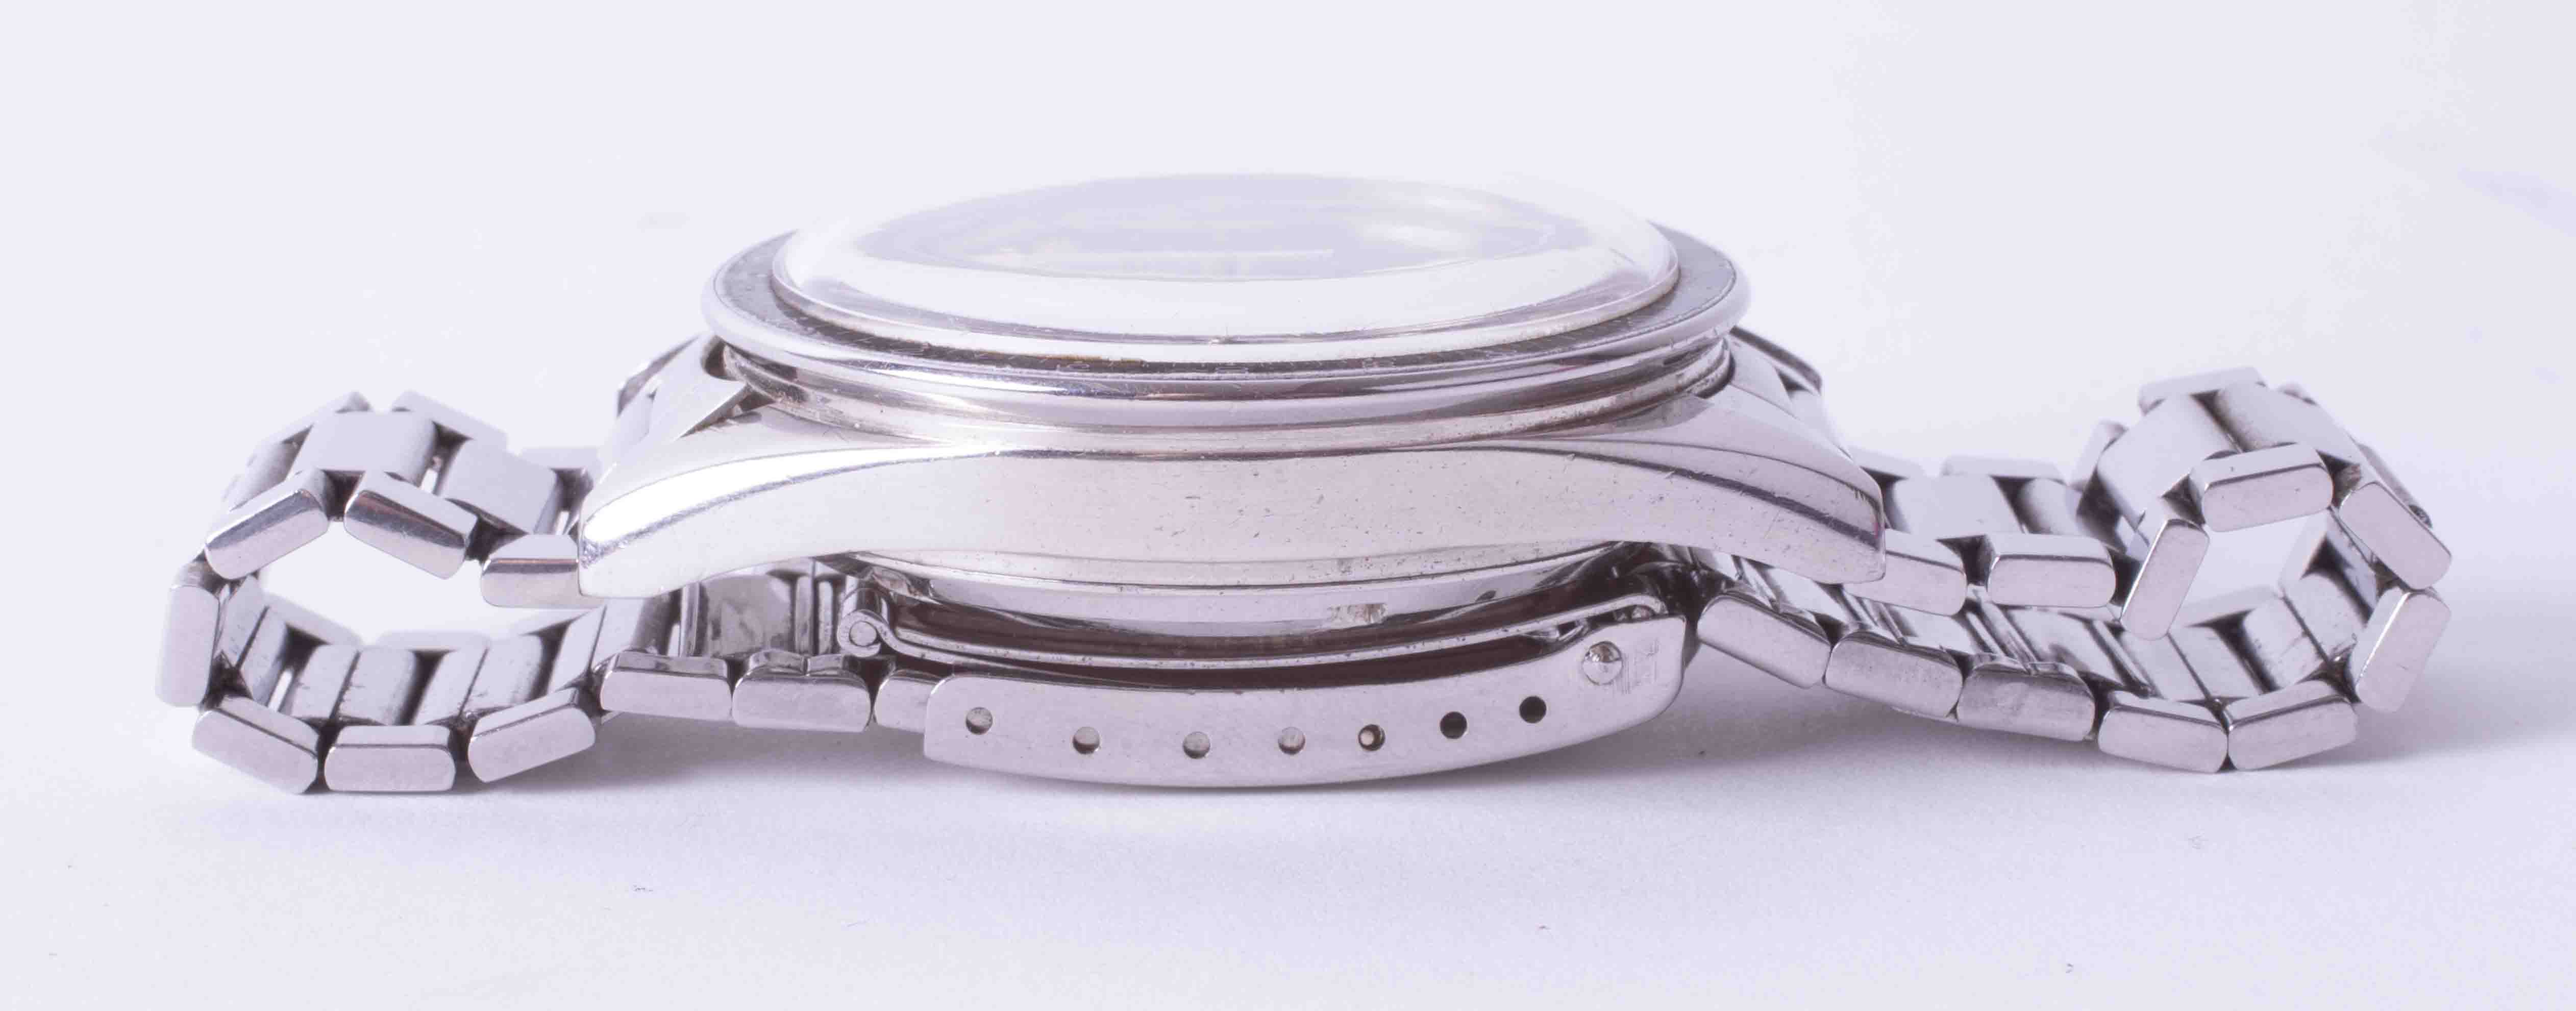 Omega Speedmaster chronograph, a rare circa 1961/2, gent's stainless steel manual wind wristwatch, - Image 7 of 7